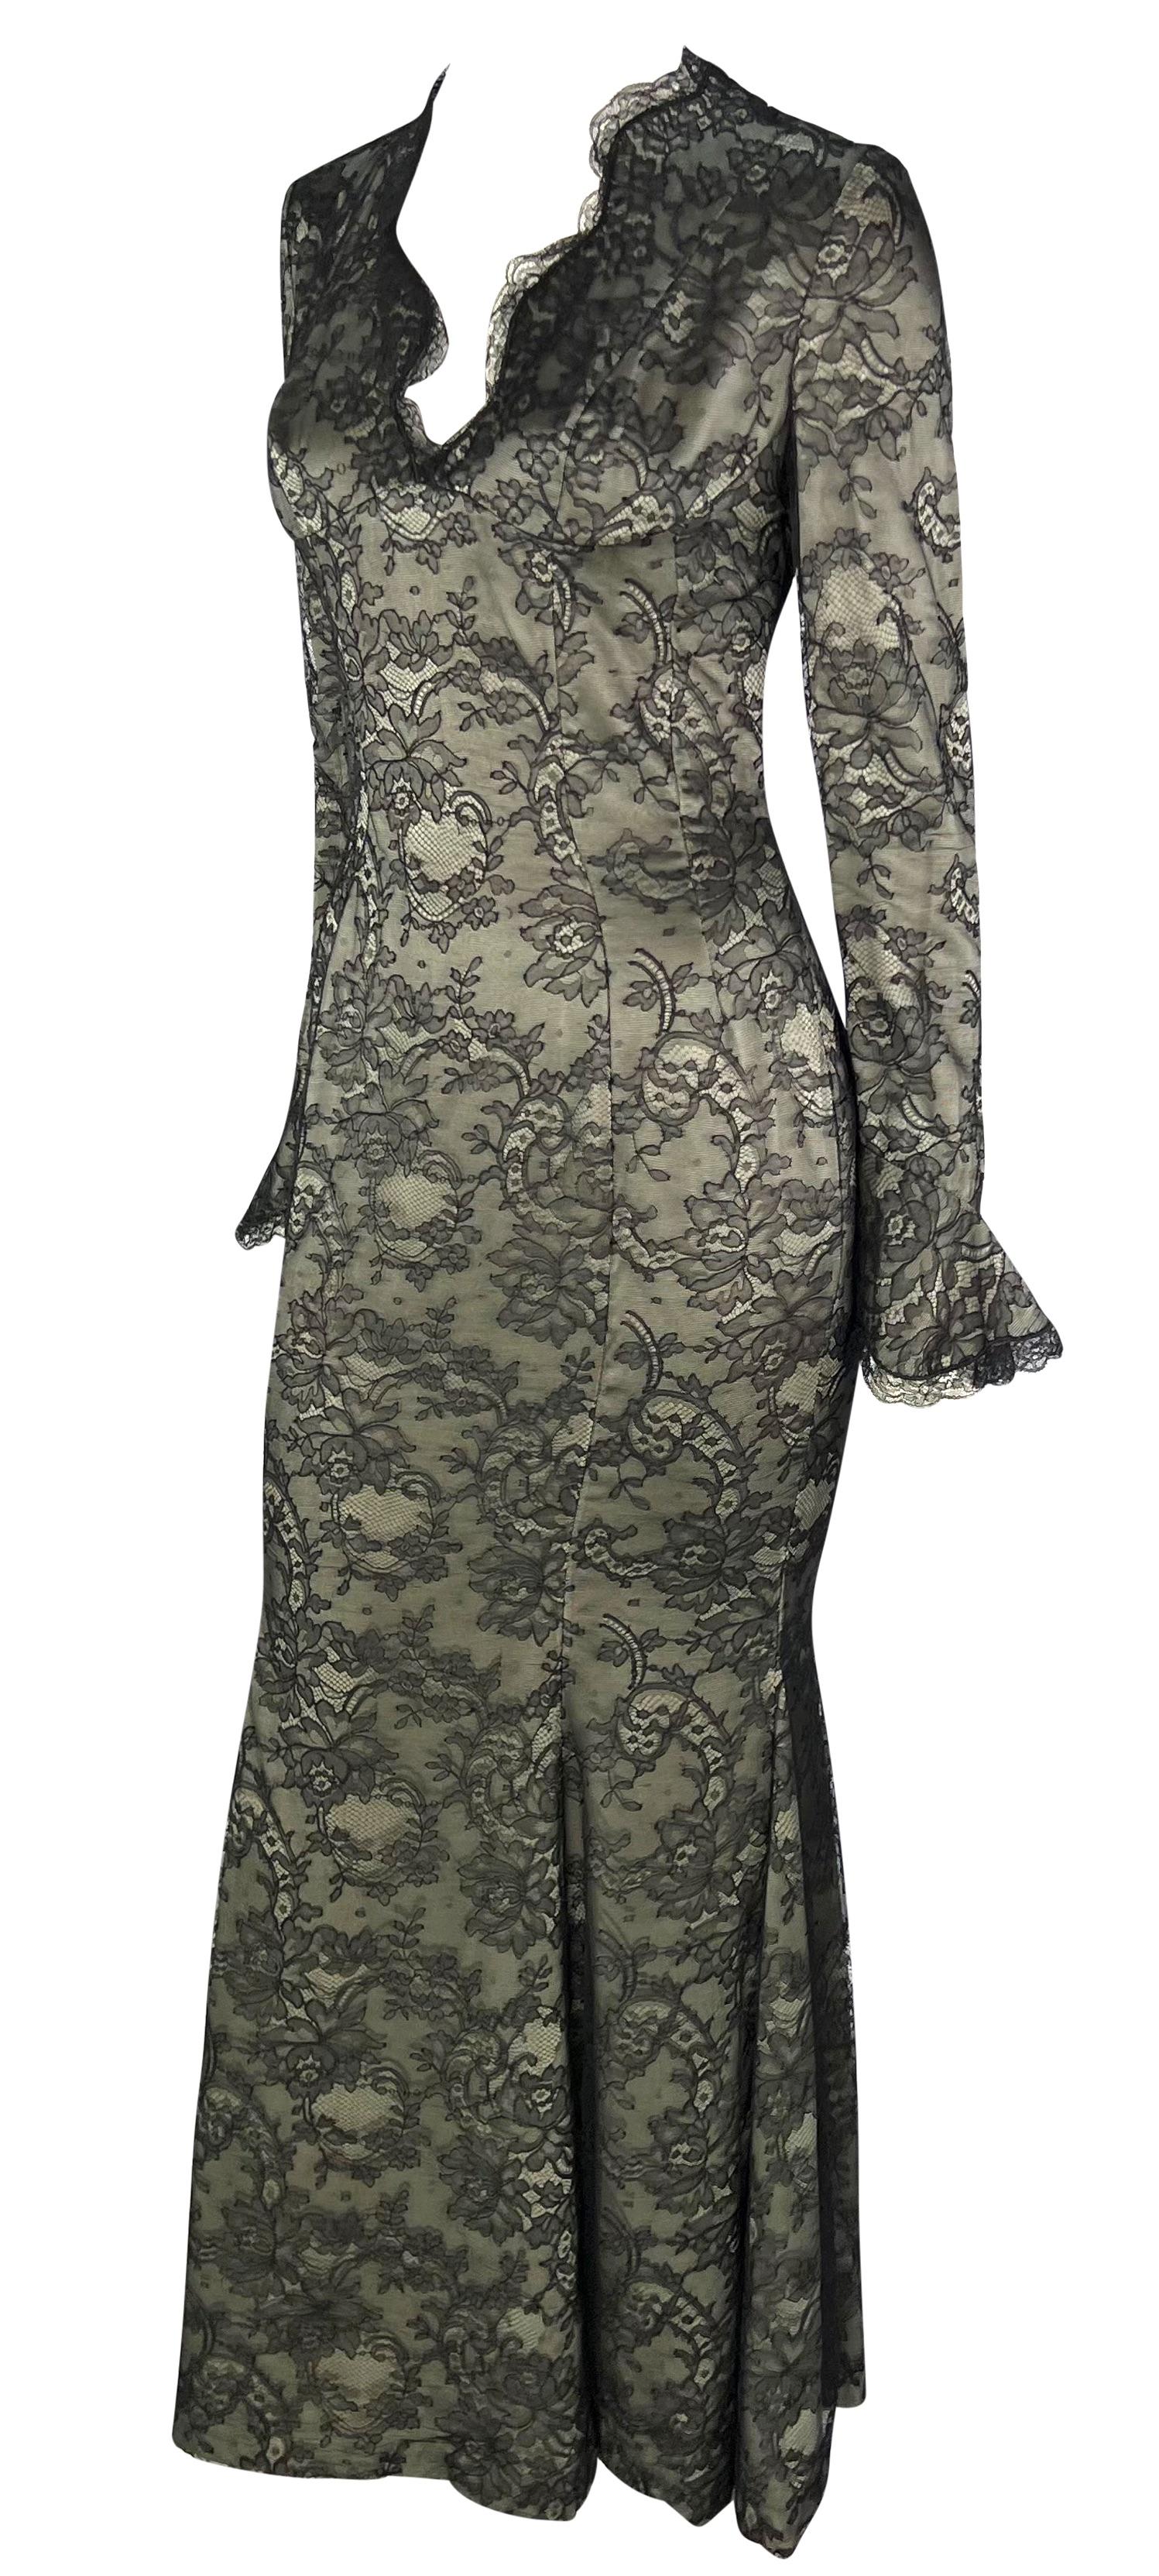 S/S 1995 Thierry Mugler Plunging Taupe Satin Black Floral Lace Overlay Gown In Excellent Condition For Sale In West Hollywood, CA